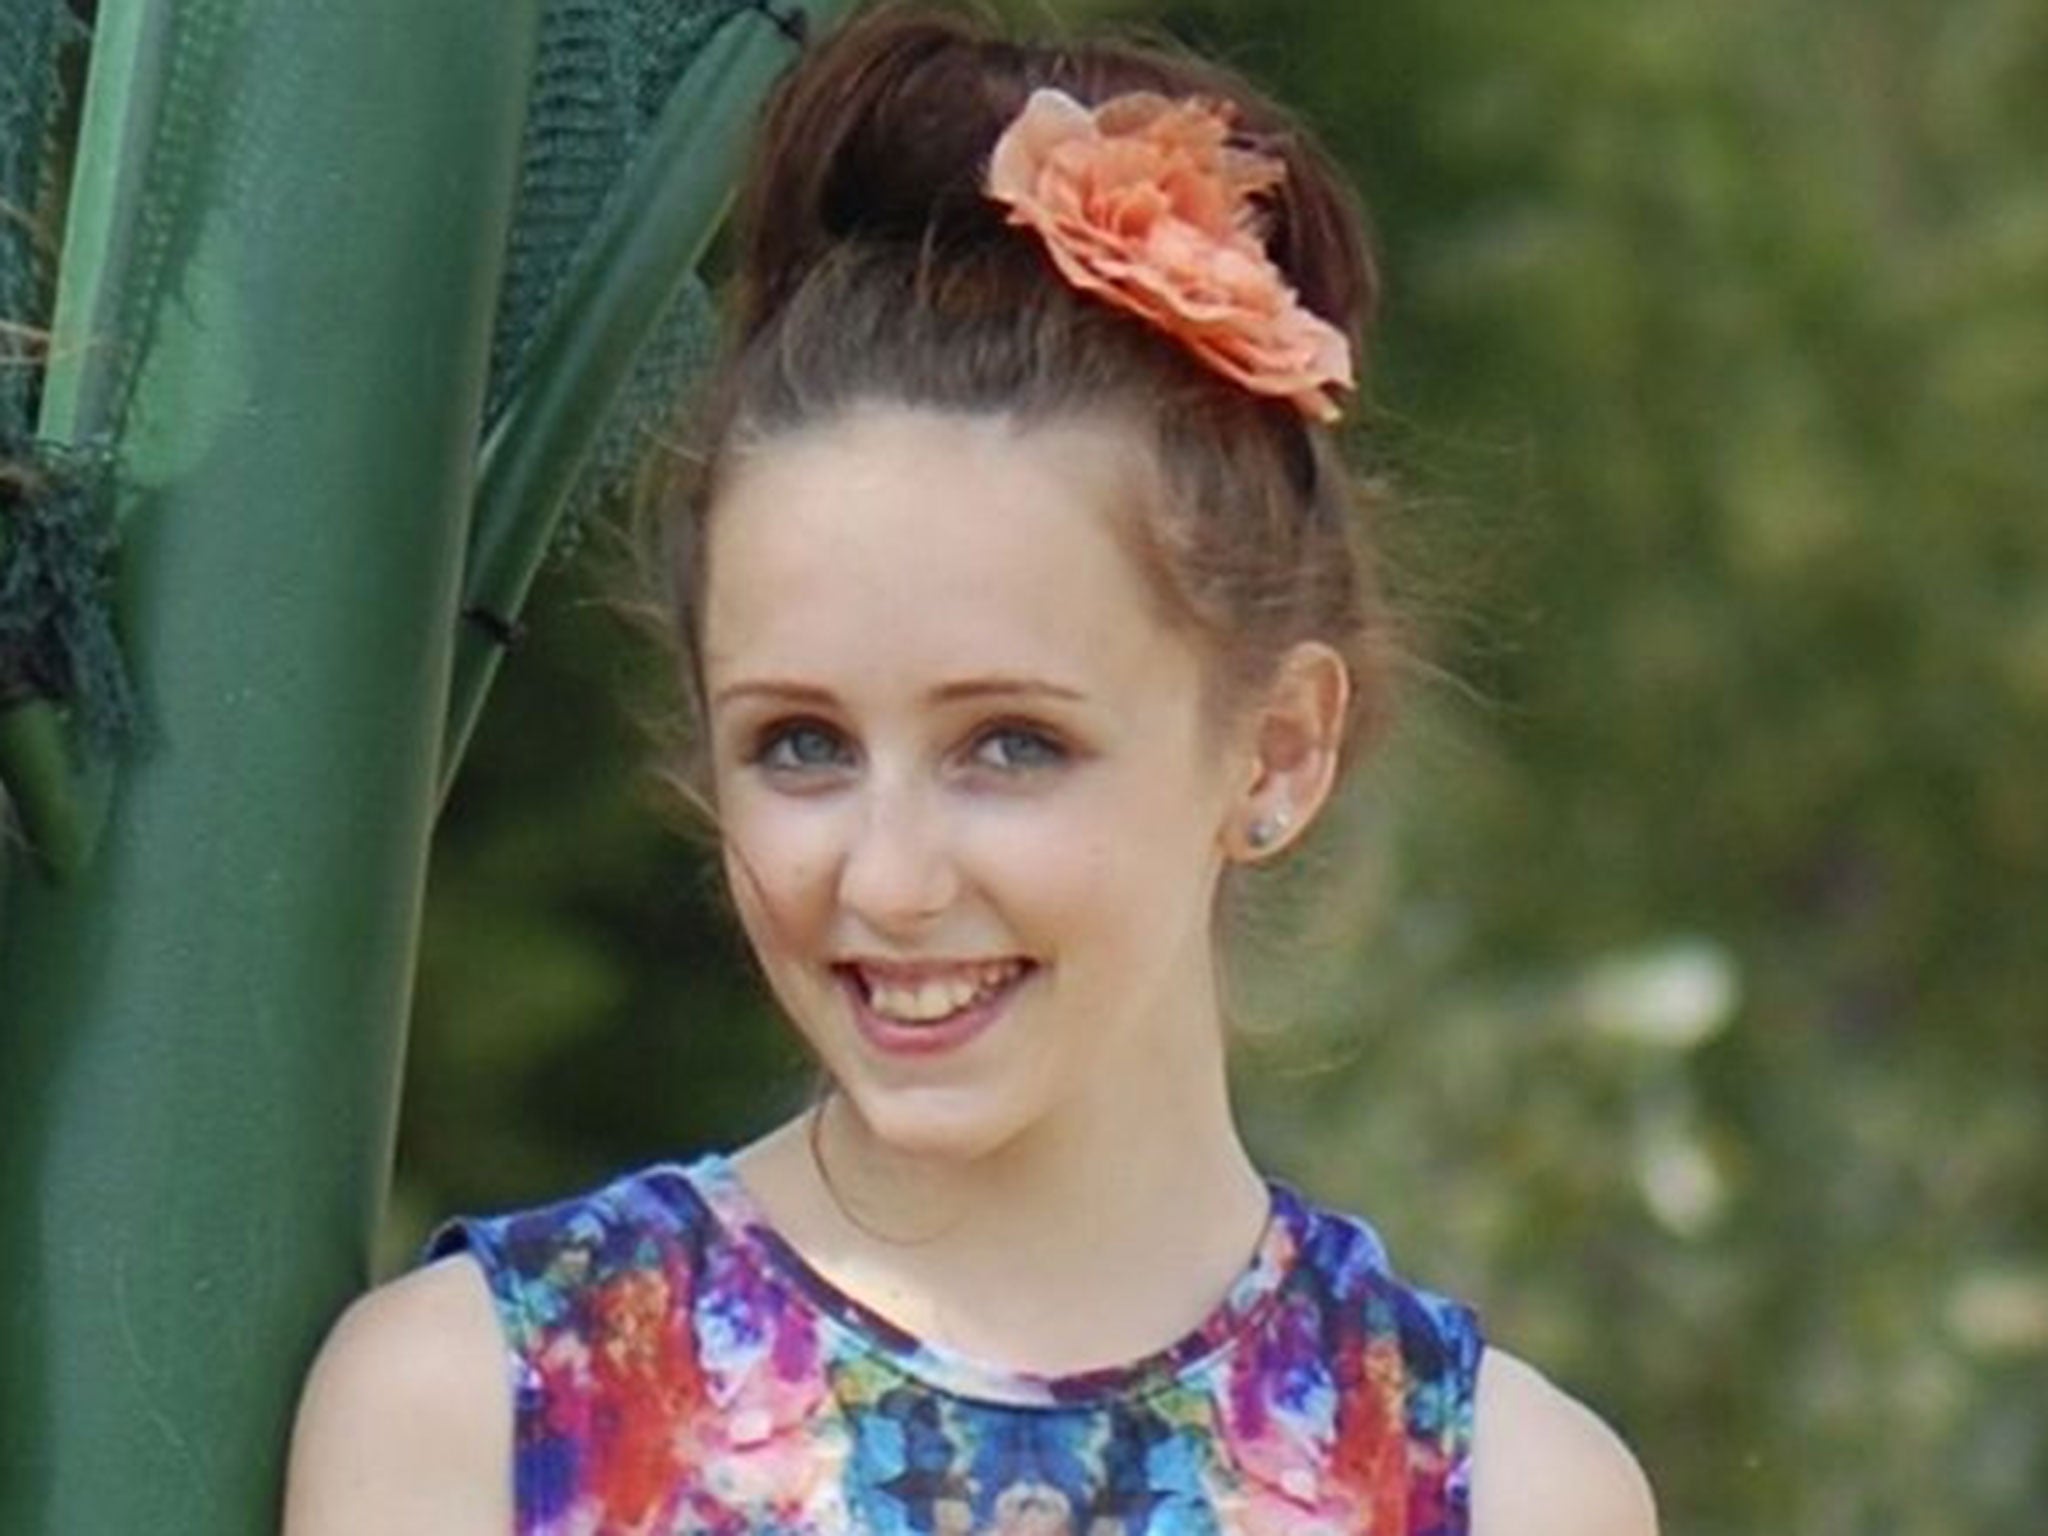 14-year-old Alice Gross, who went missing more than a month ago while walking along a canal in west London.